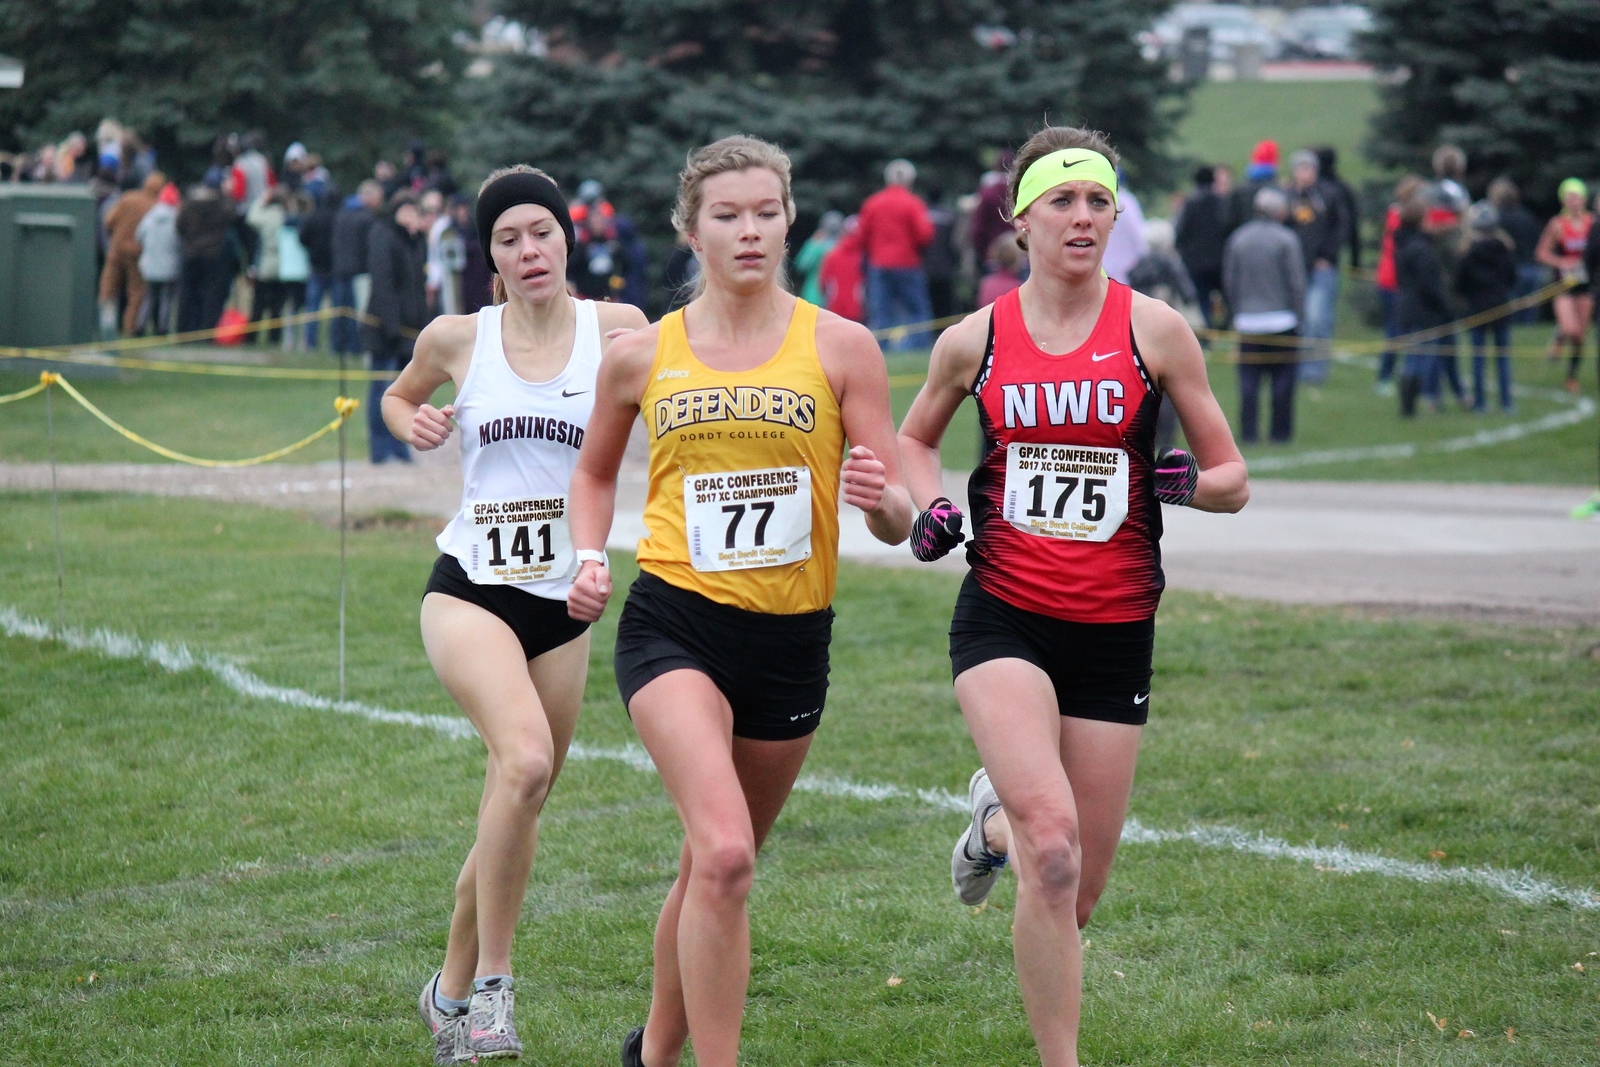 A Dordt Women's Cross Country runner competes at the Conference race